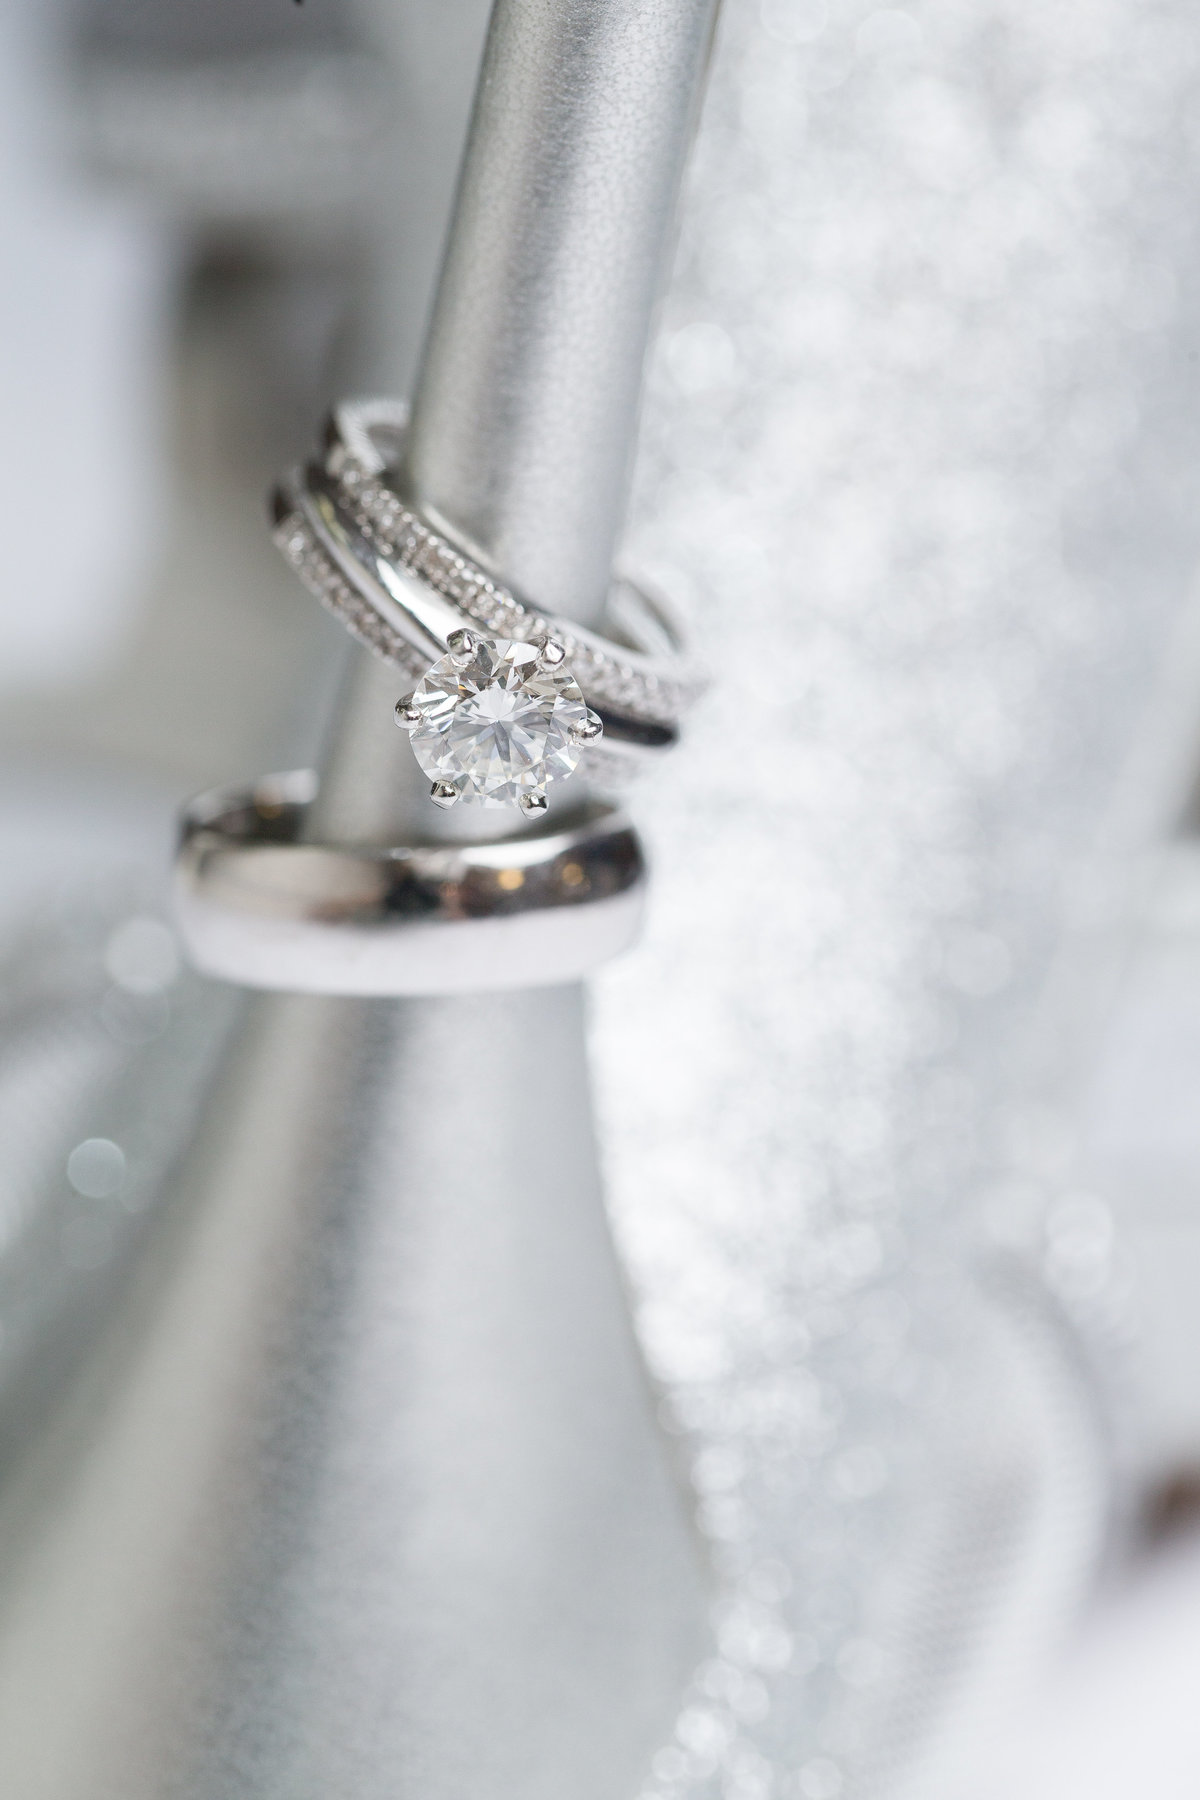 Detail shot of wedding ring and shoes.